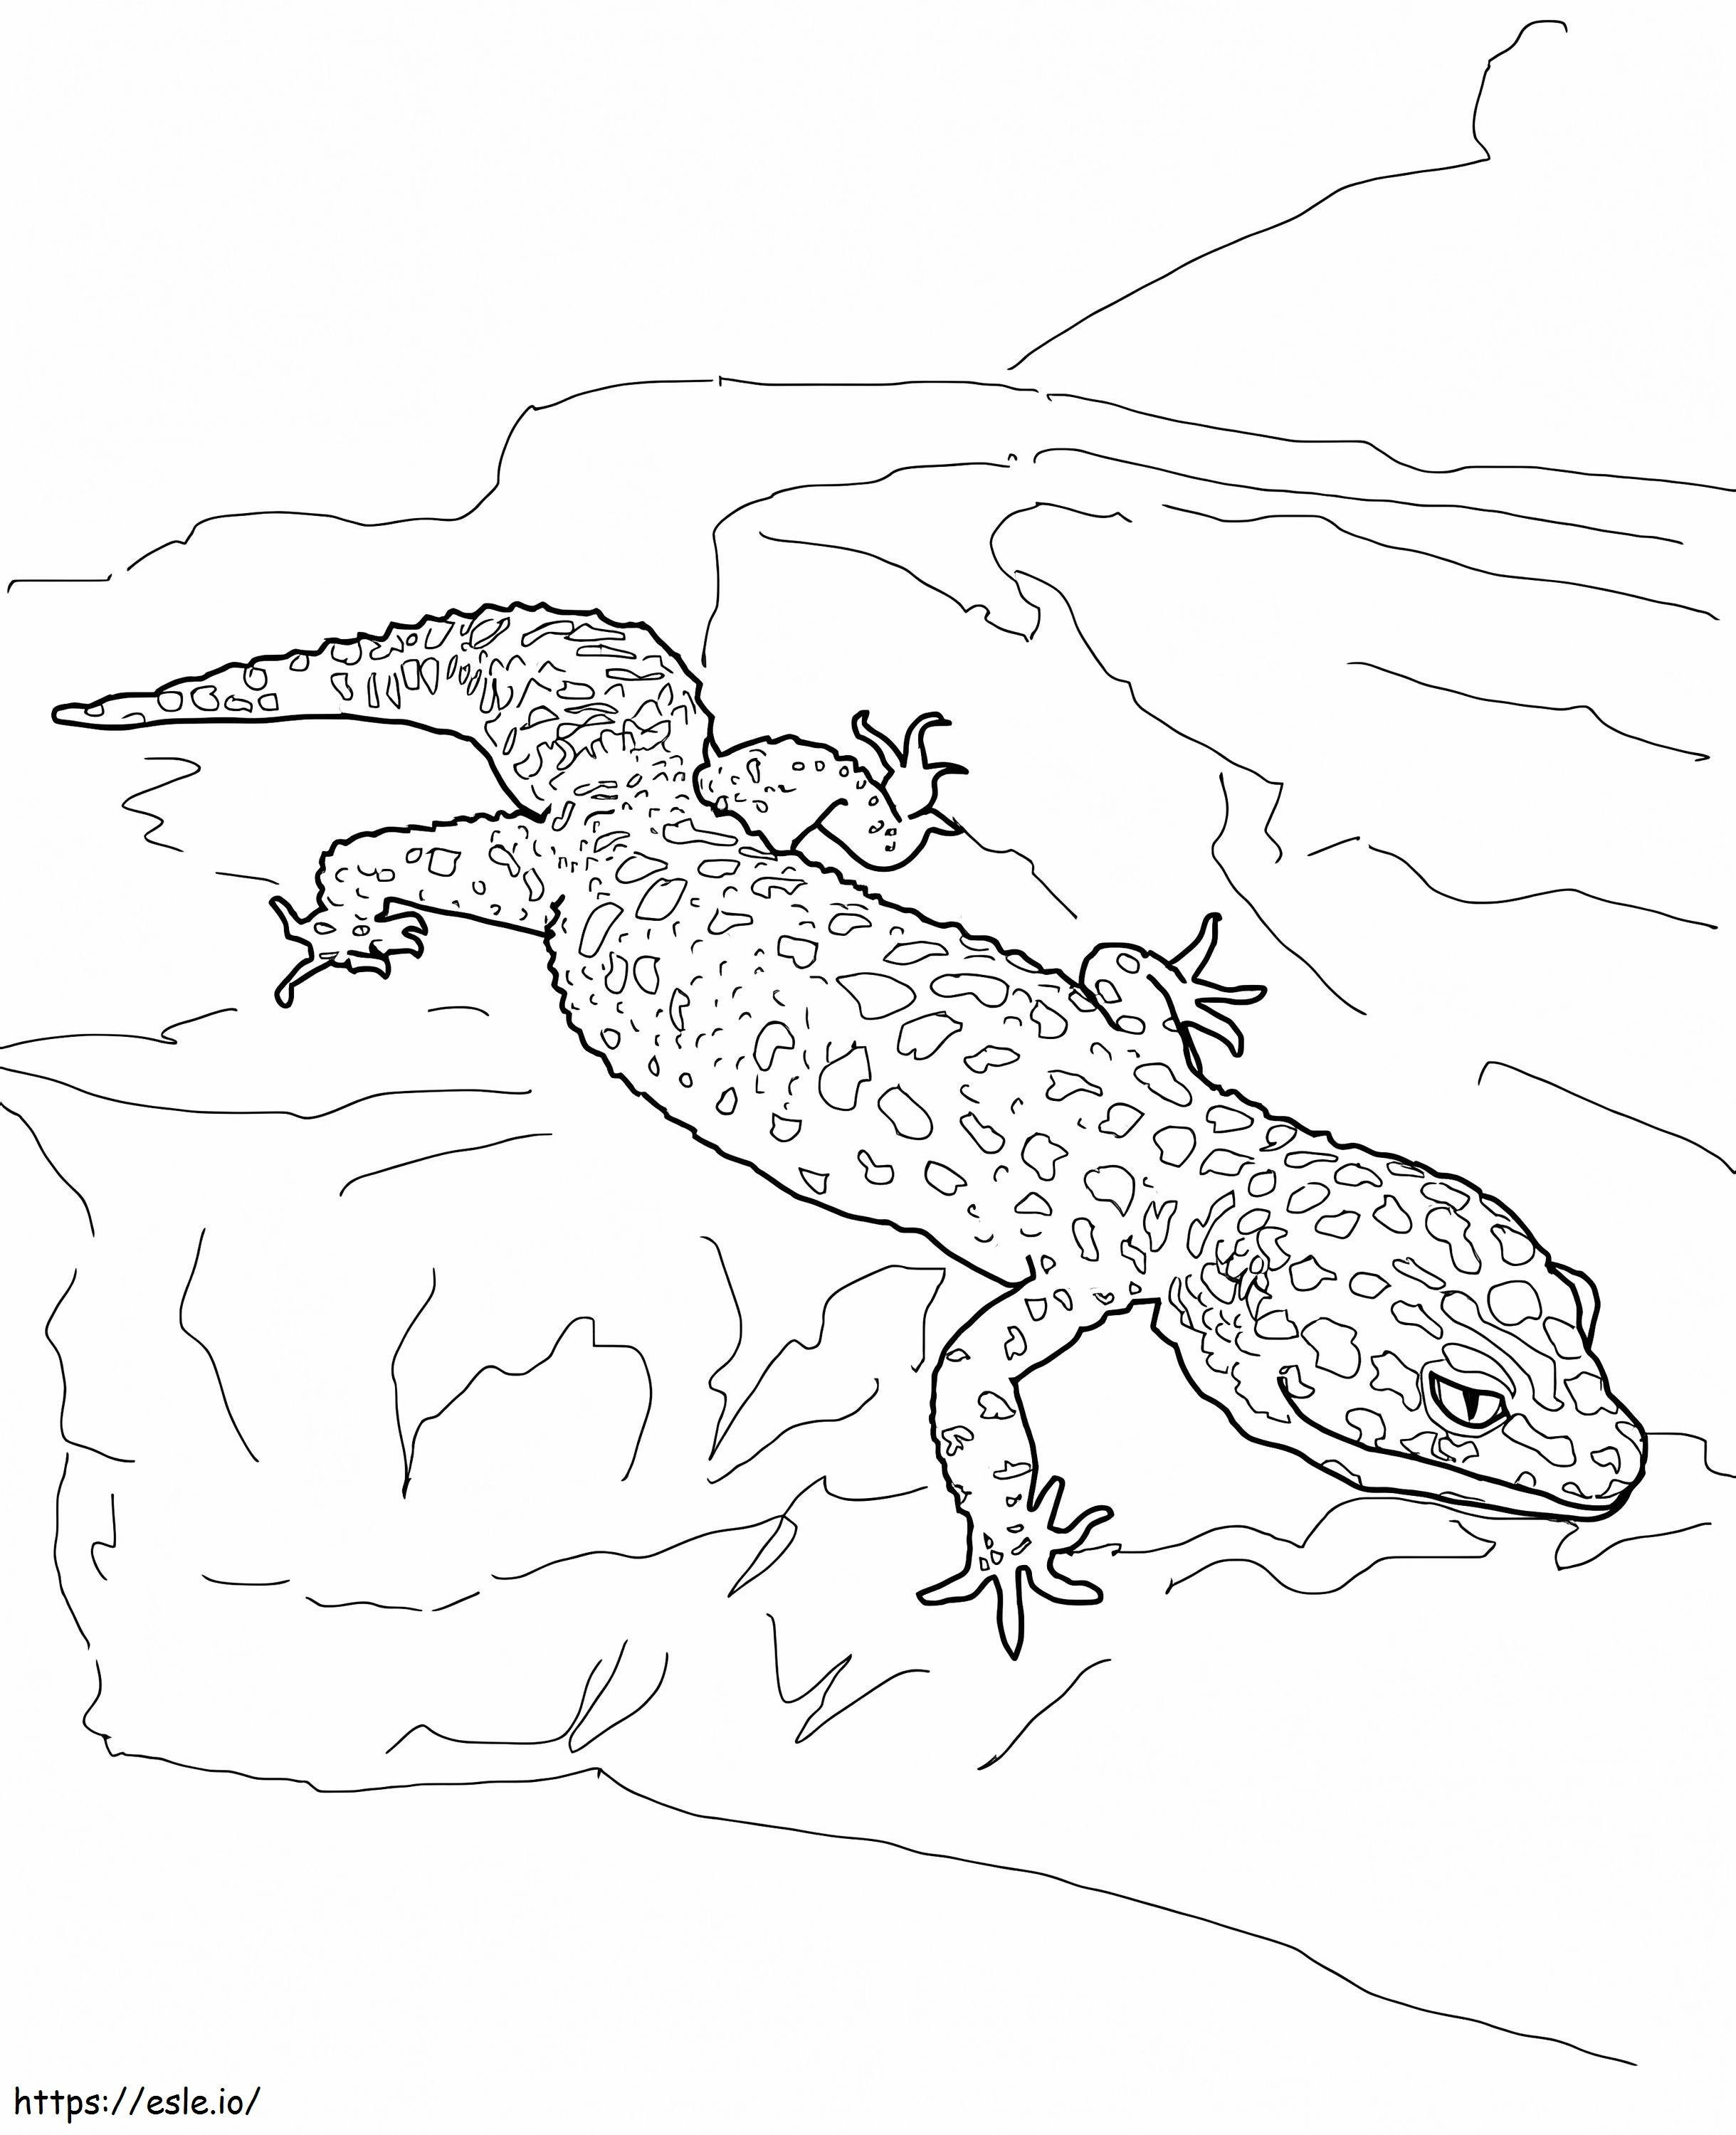 Gecko Leopard coloring page